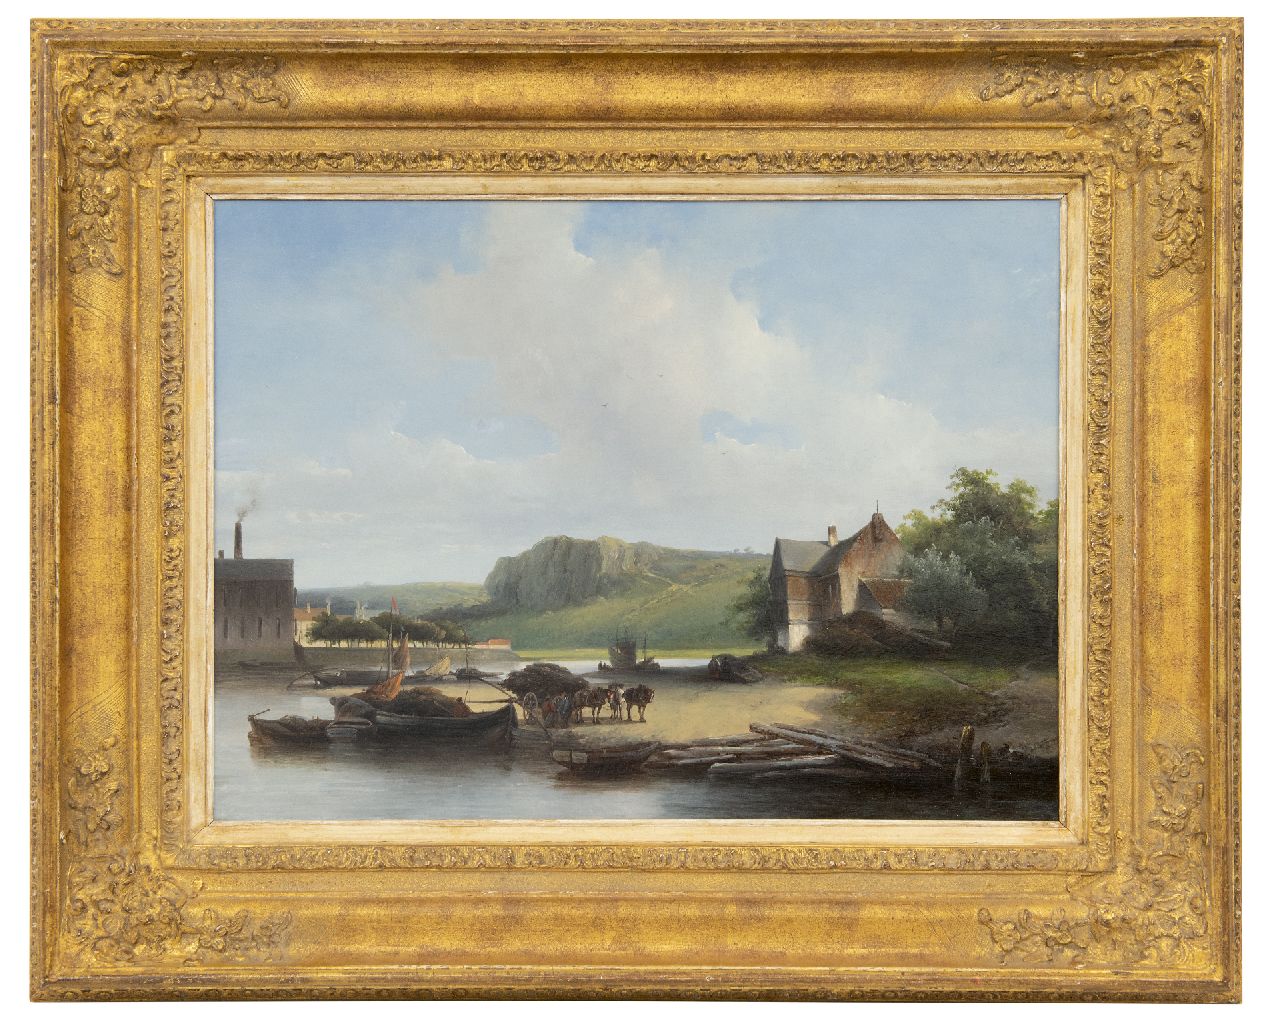 Hoppenbrouwers J.F.  | Johannes Franciscus Hoppenbrouwers | Paintings offered for sale | The river Maas with ships at a loading wharf, oil on panel 39.5 x 53.7 cm, signed l.r. and dated '40